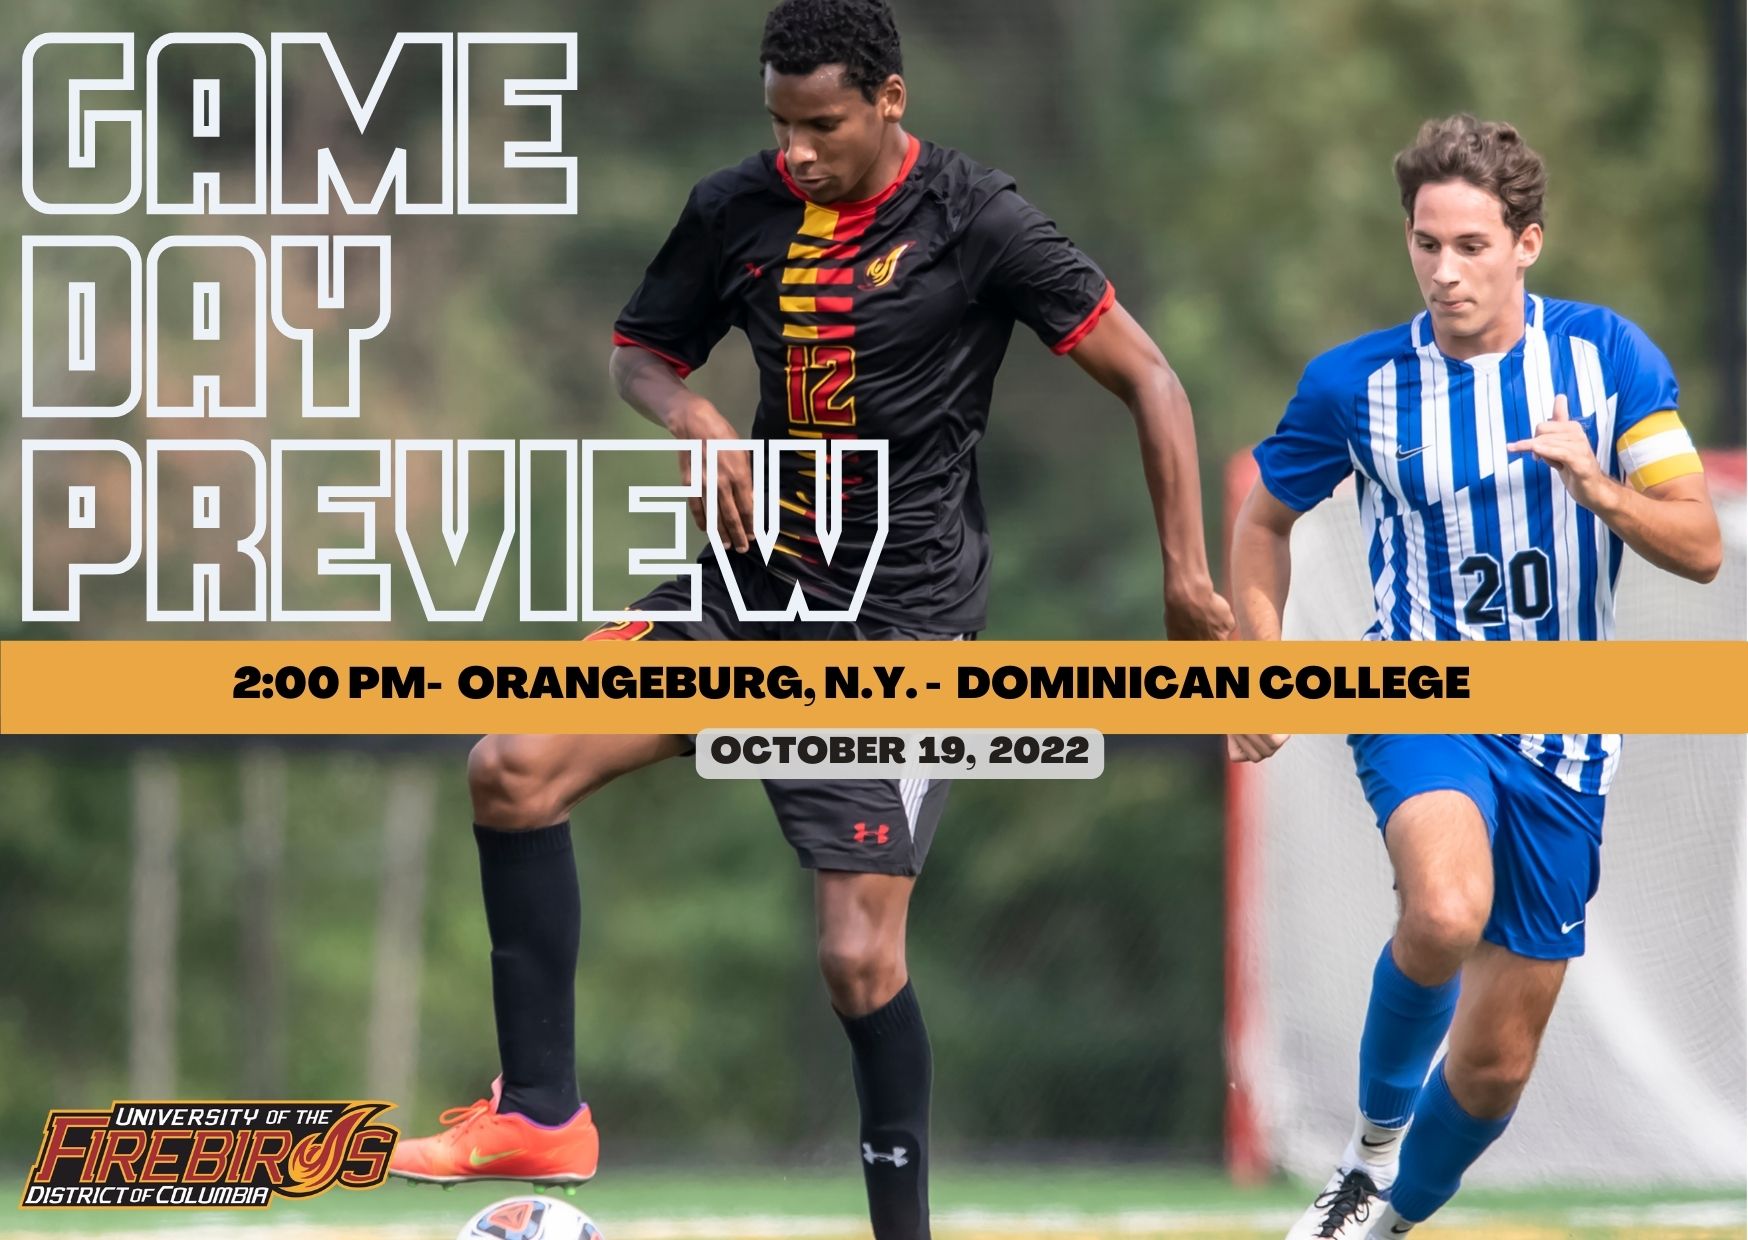 MEN'S SOCCER: GAME DAY PREVIEW 10/19